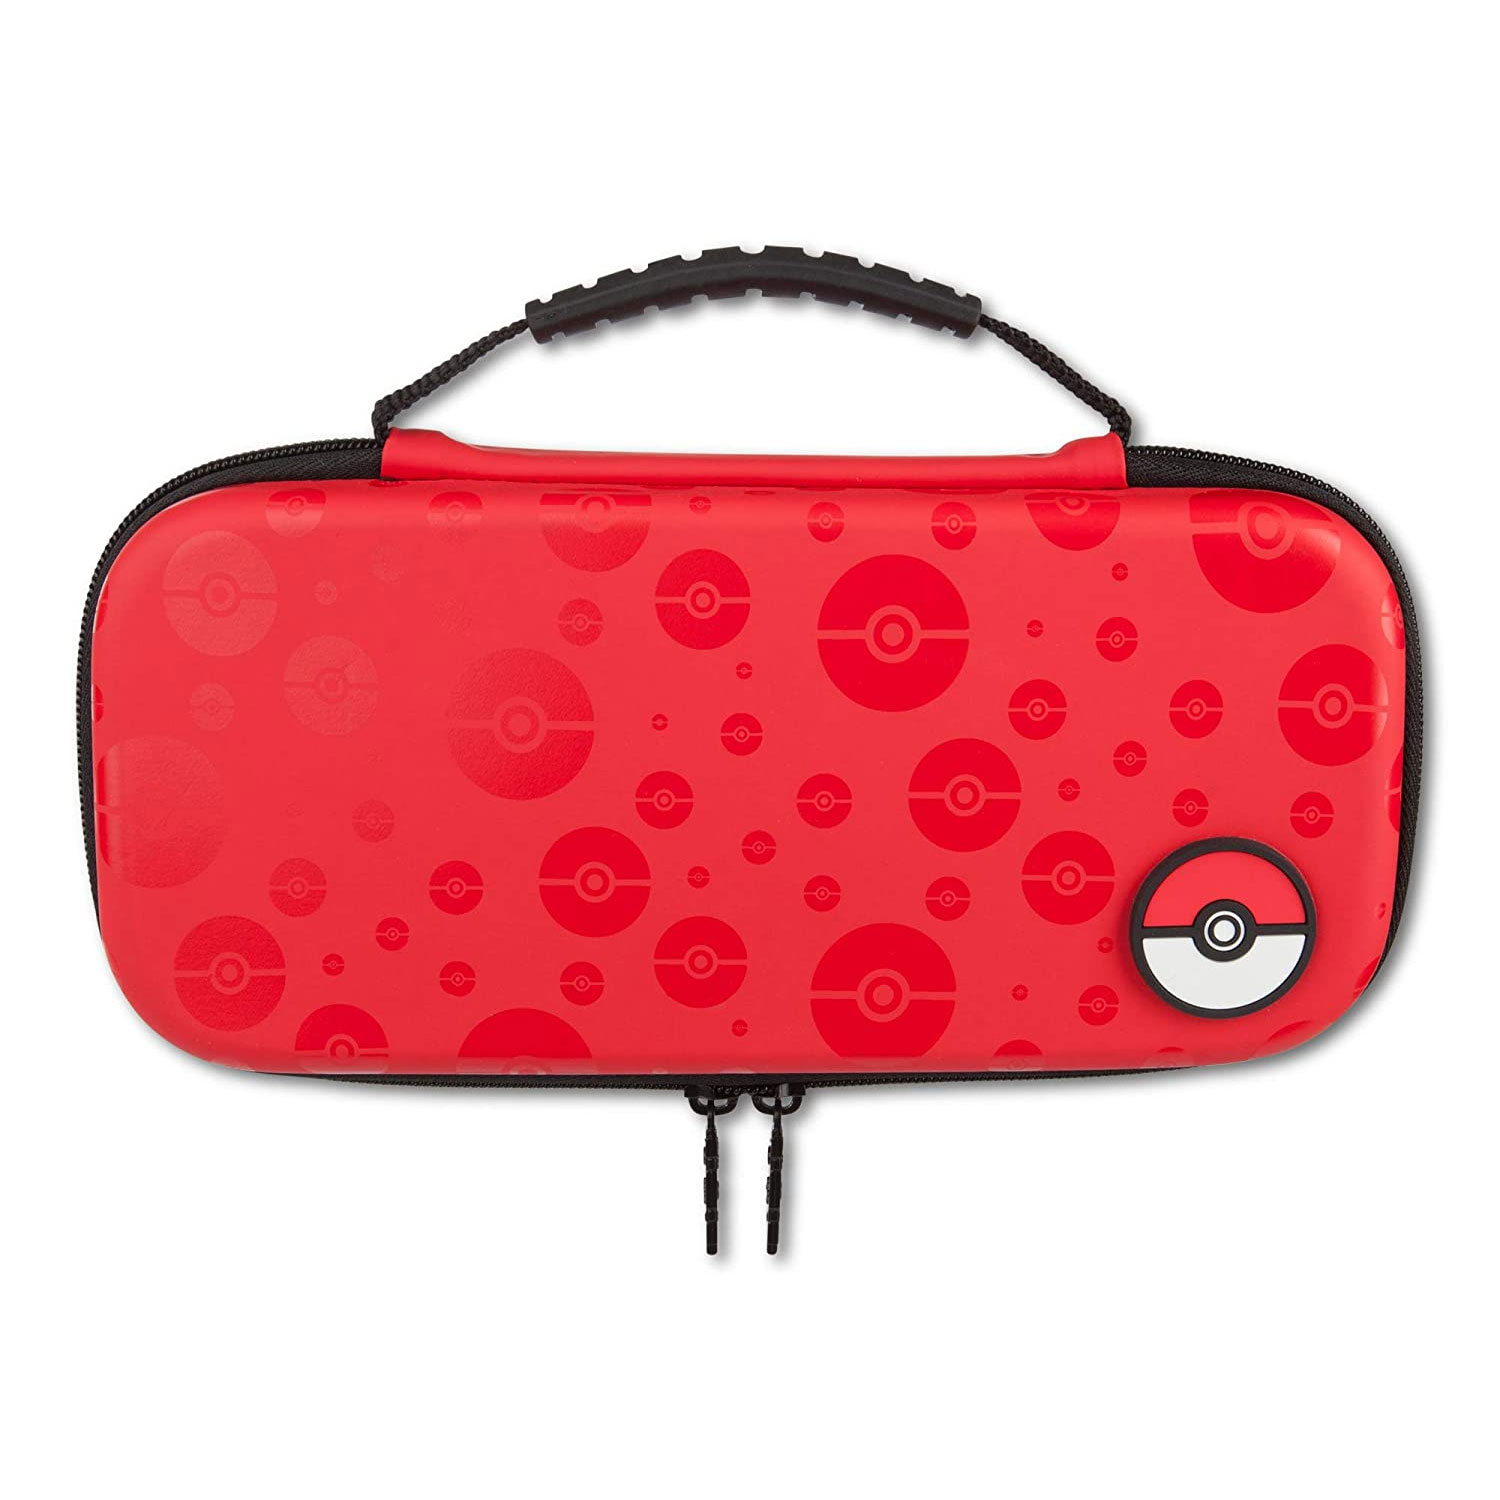 Protection Case for Nintendo Switch Poke Ball Red Nintendo Switch